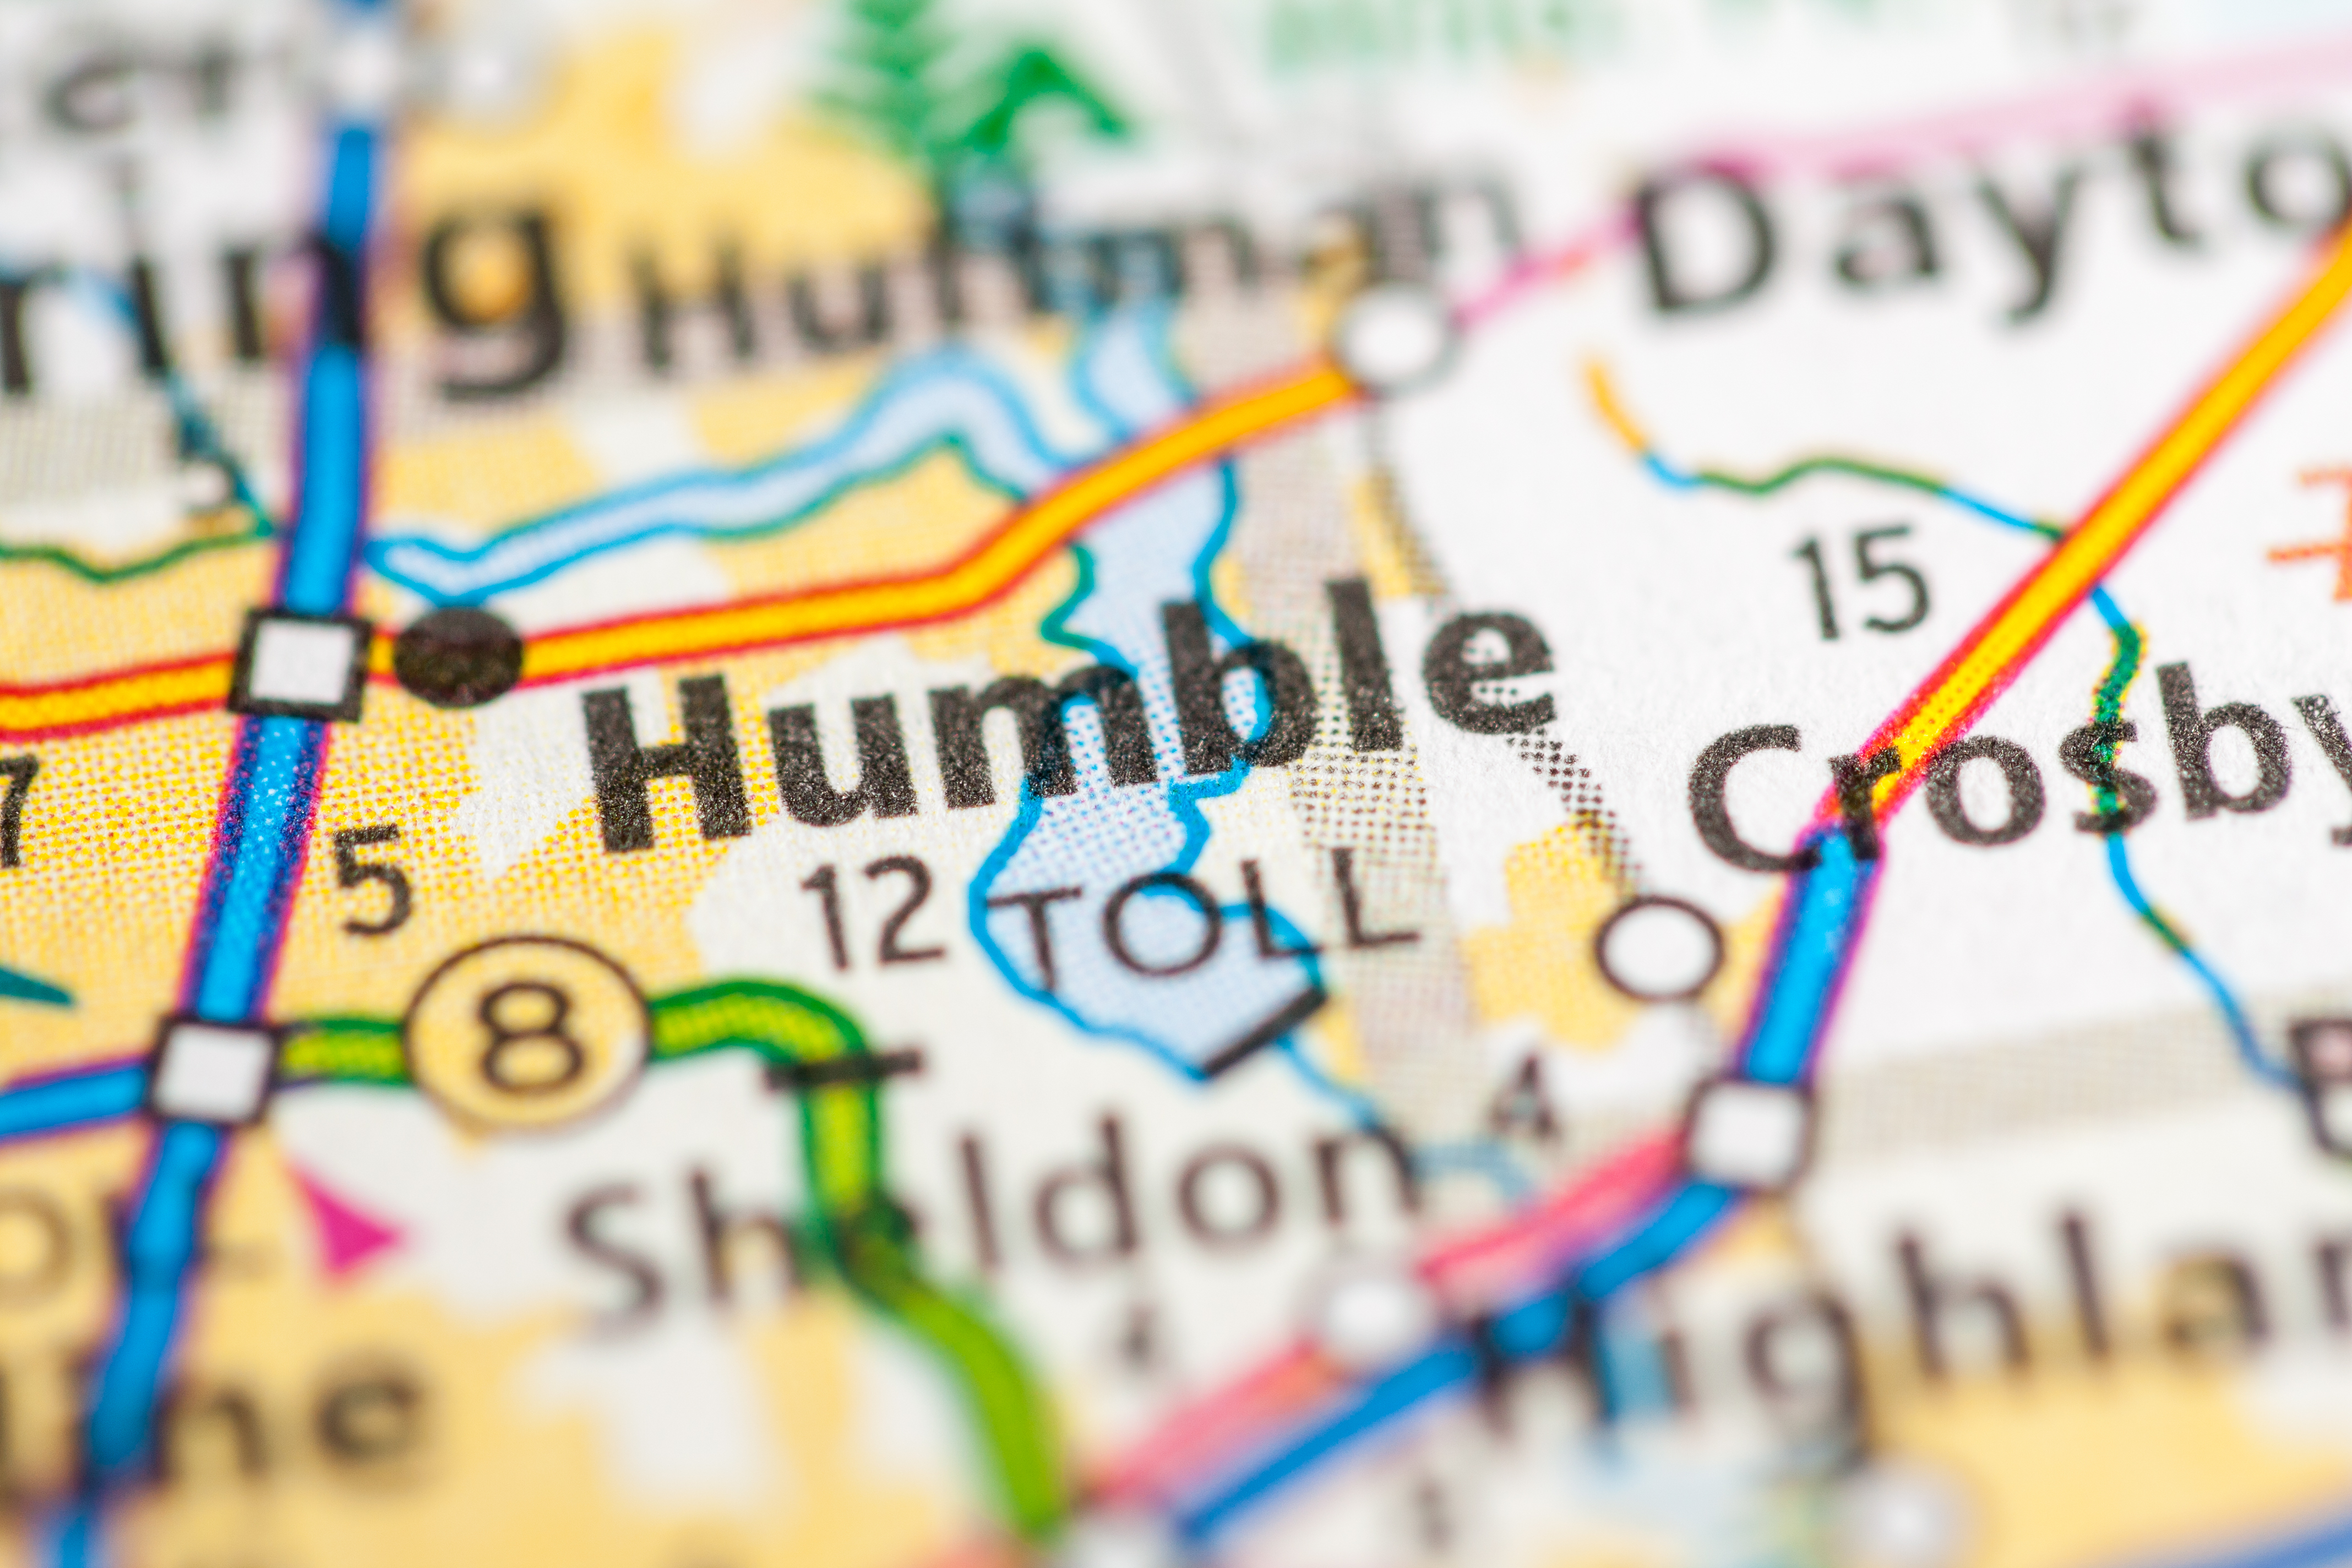 Fun Things To Do in Humble, TX + A Few Free Things To Do in Humble!